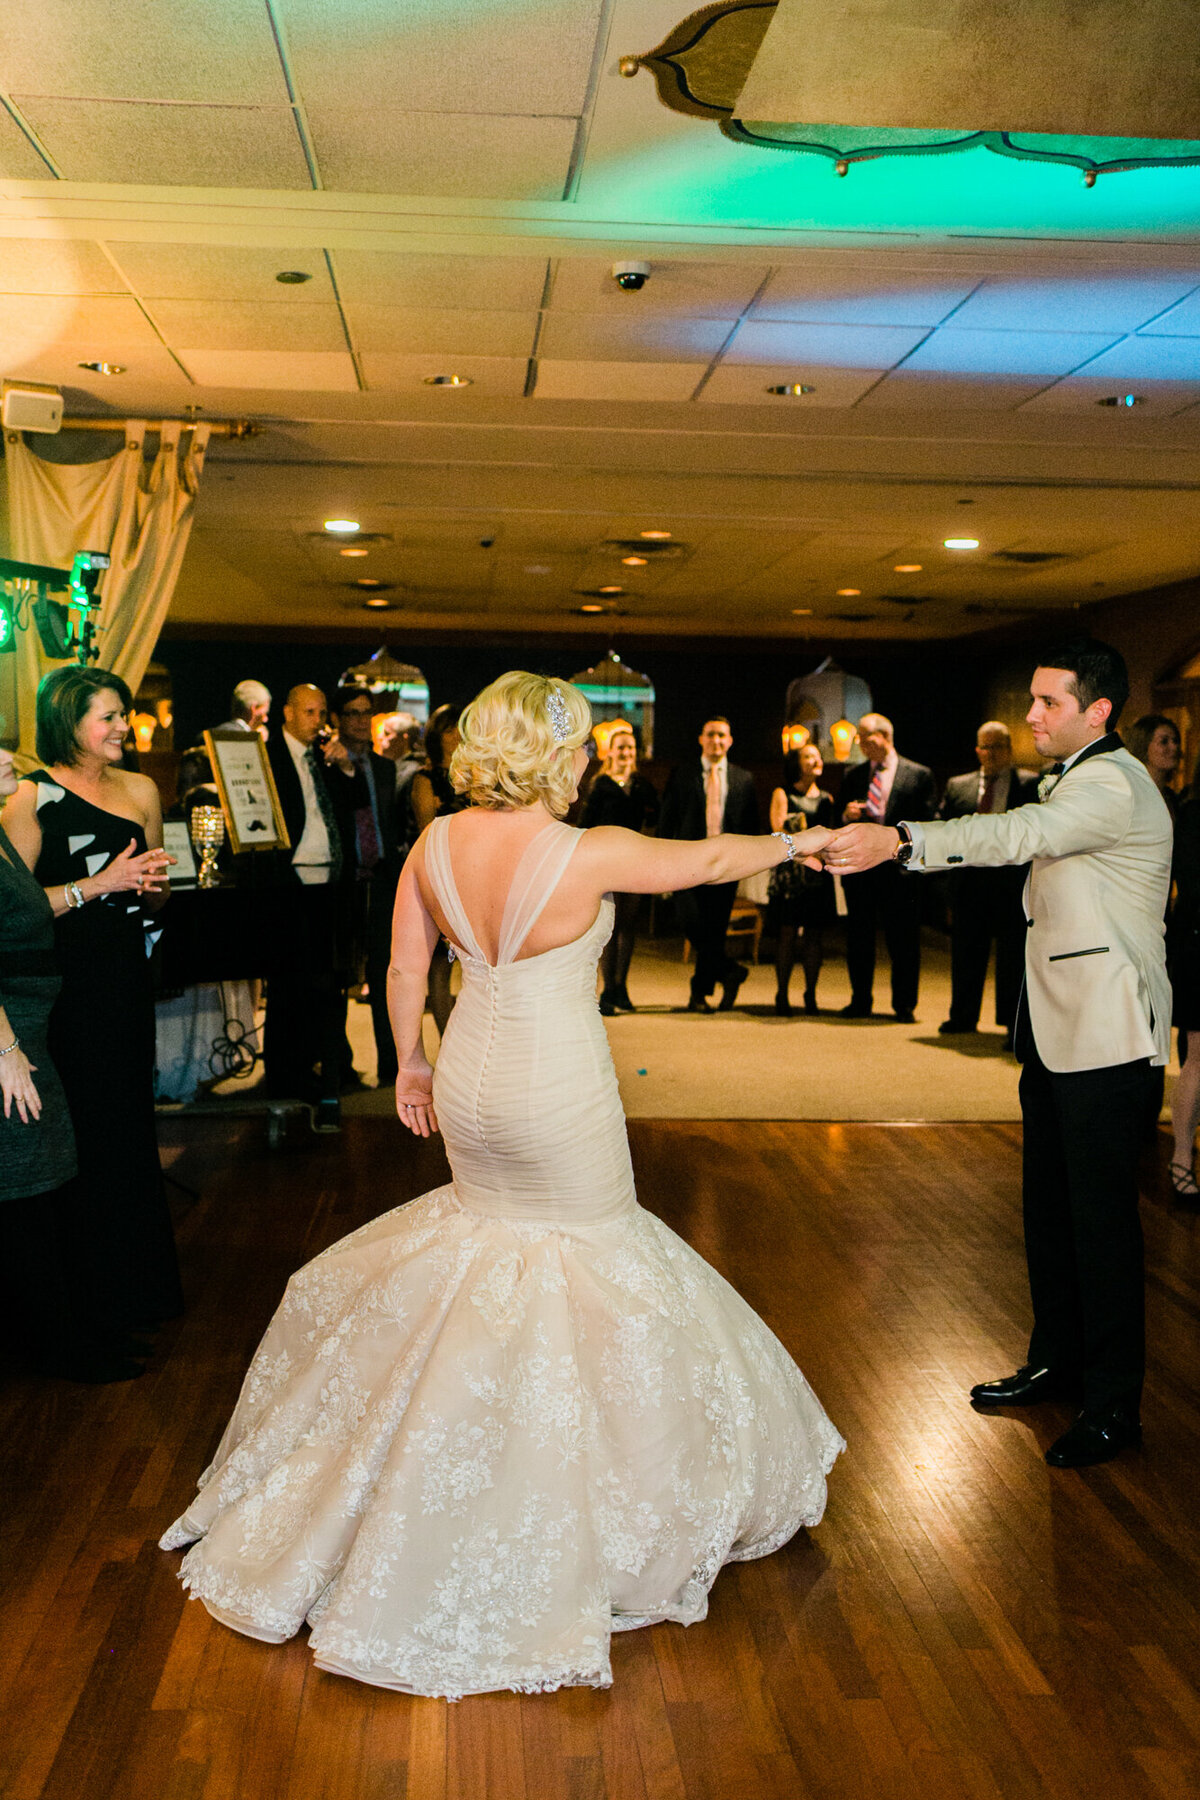 A couple shares their first dance at their wedding reception in Chicago